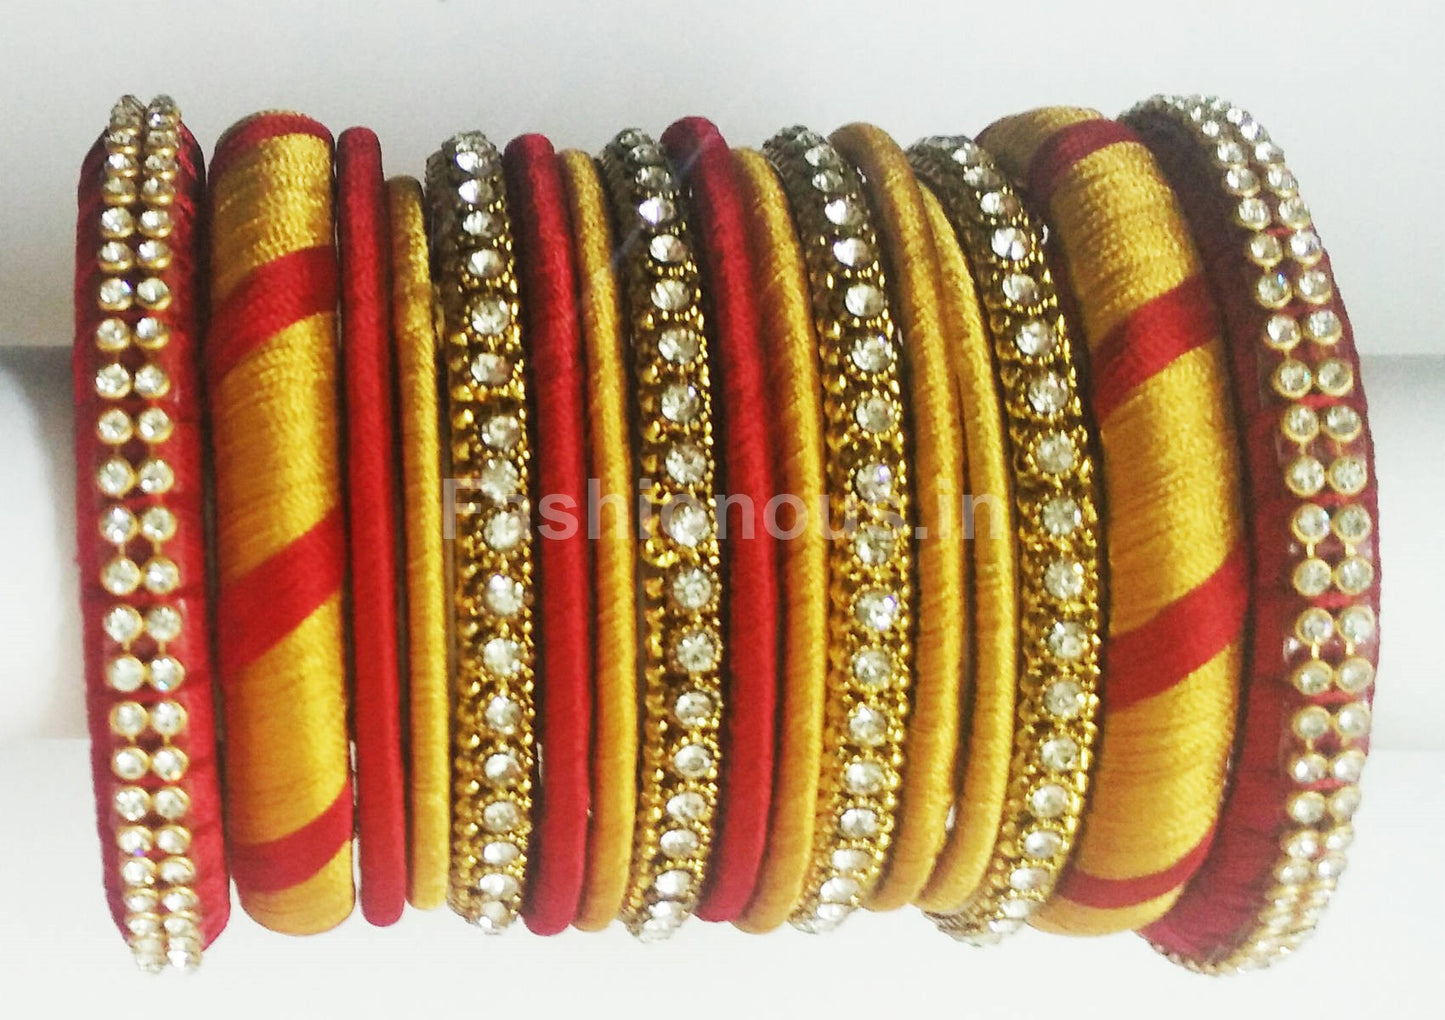 Red and Gold Silk Thread Jewellery Set